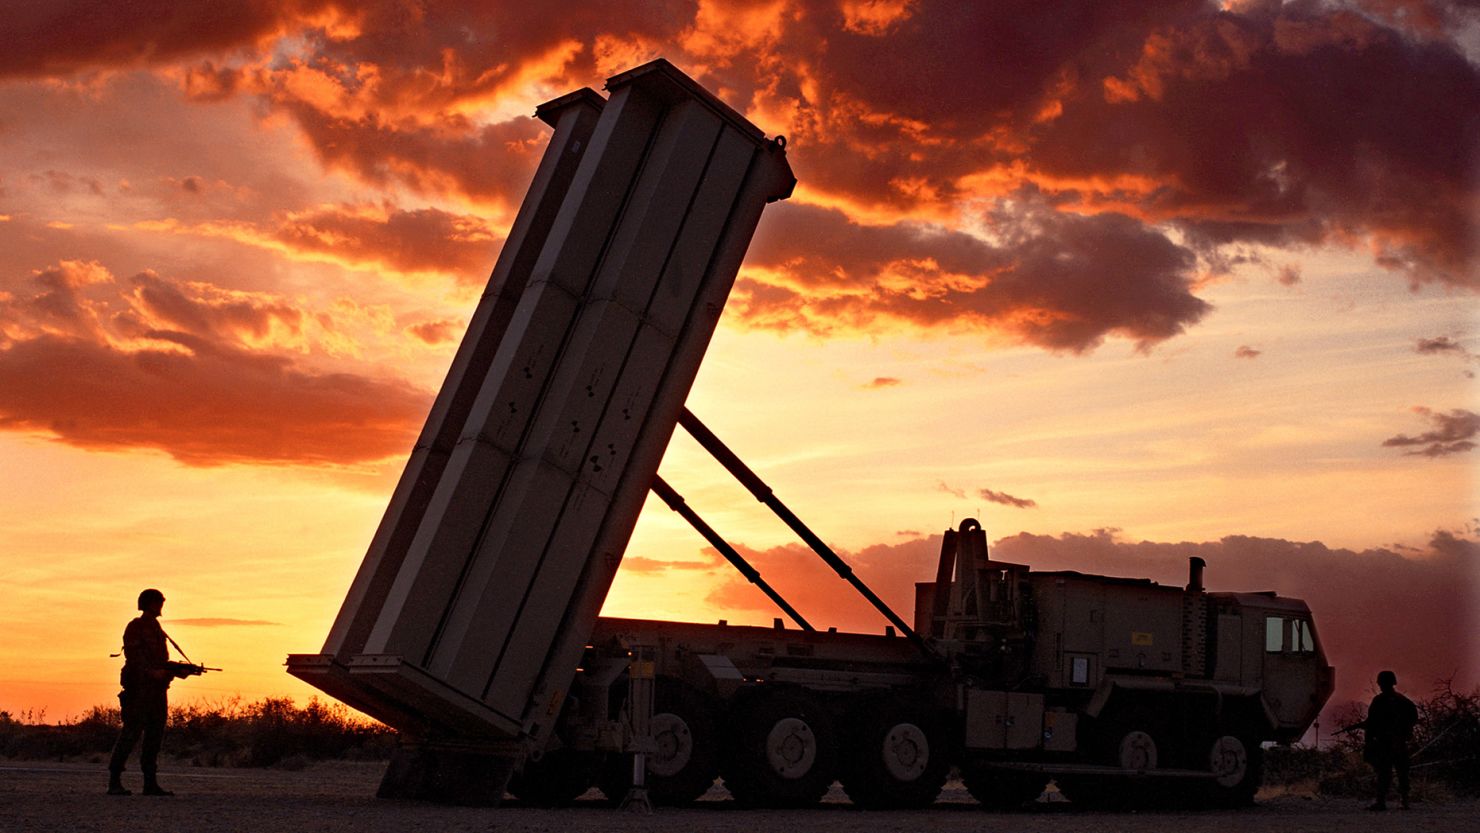 The defense system includes missiles, a truck-mounted launcher and radar.